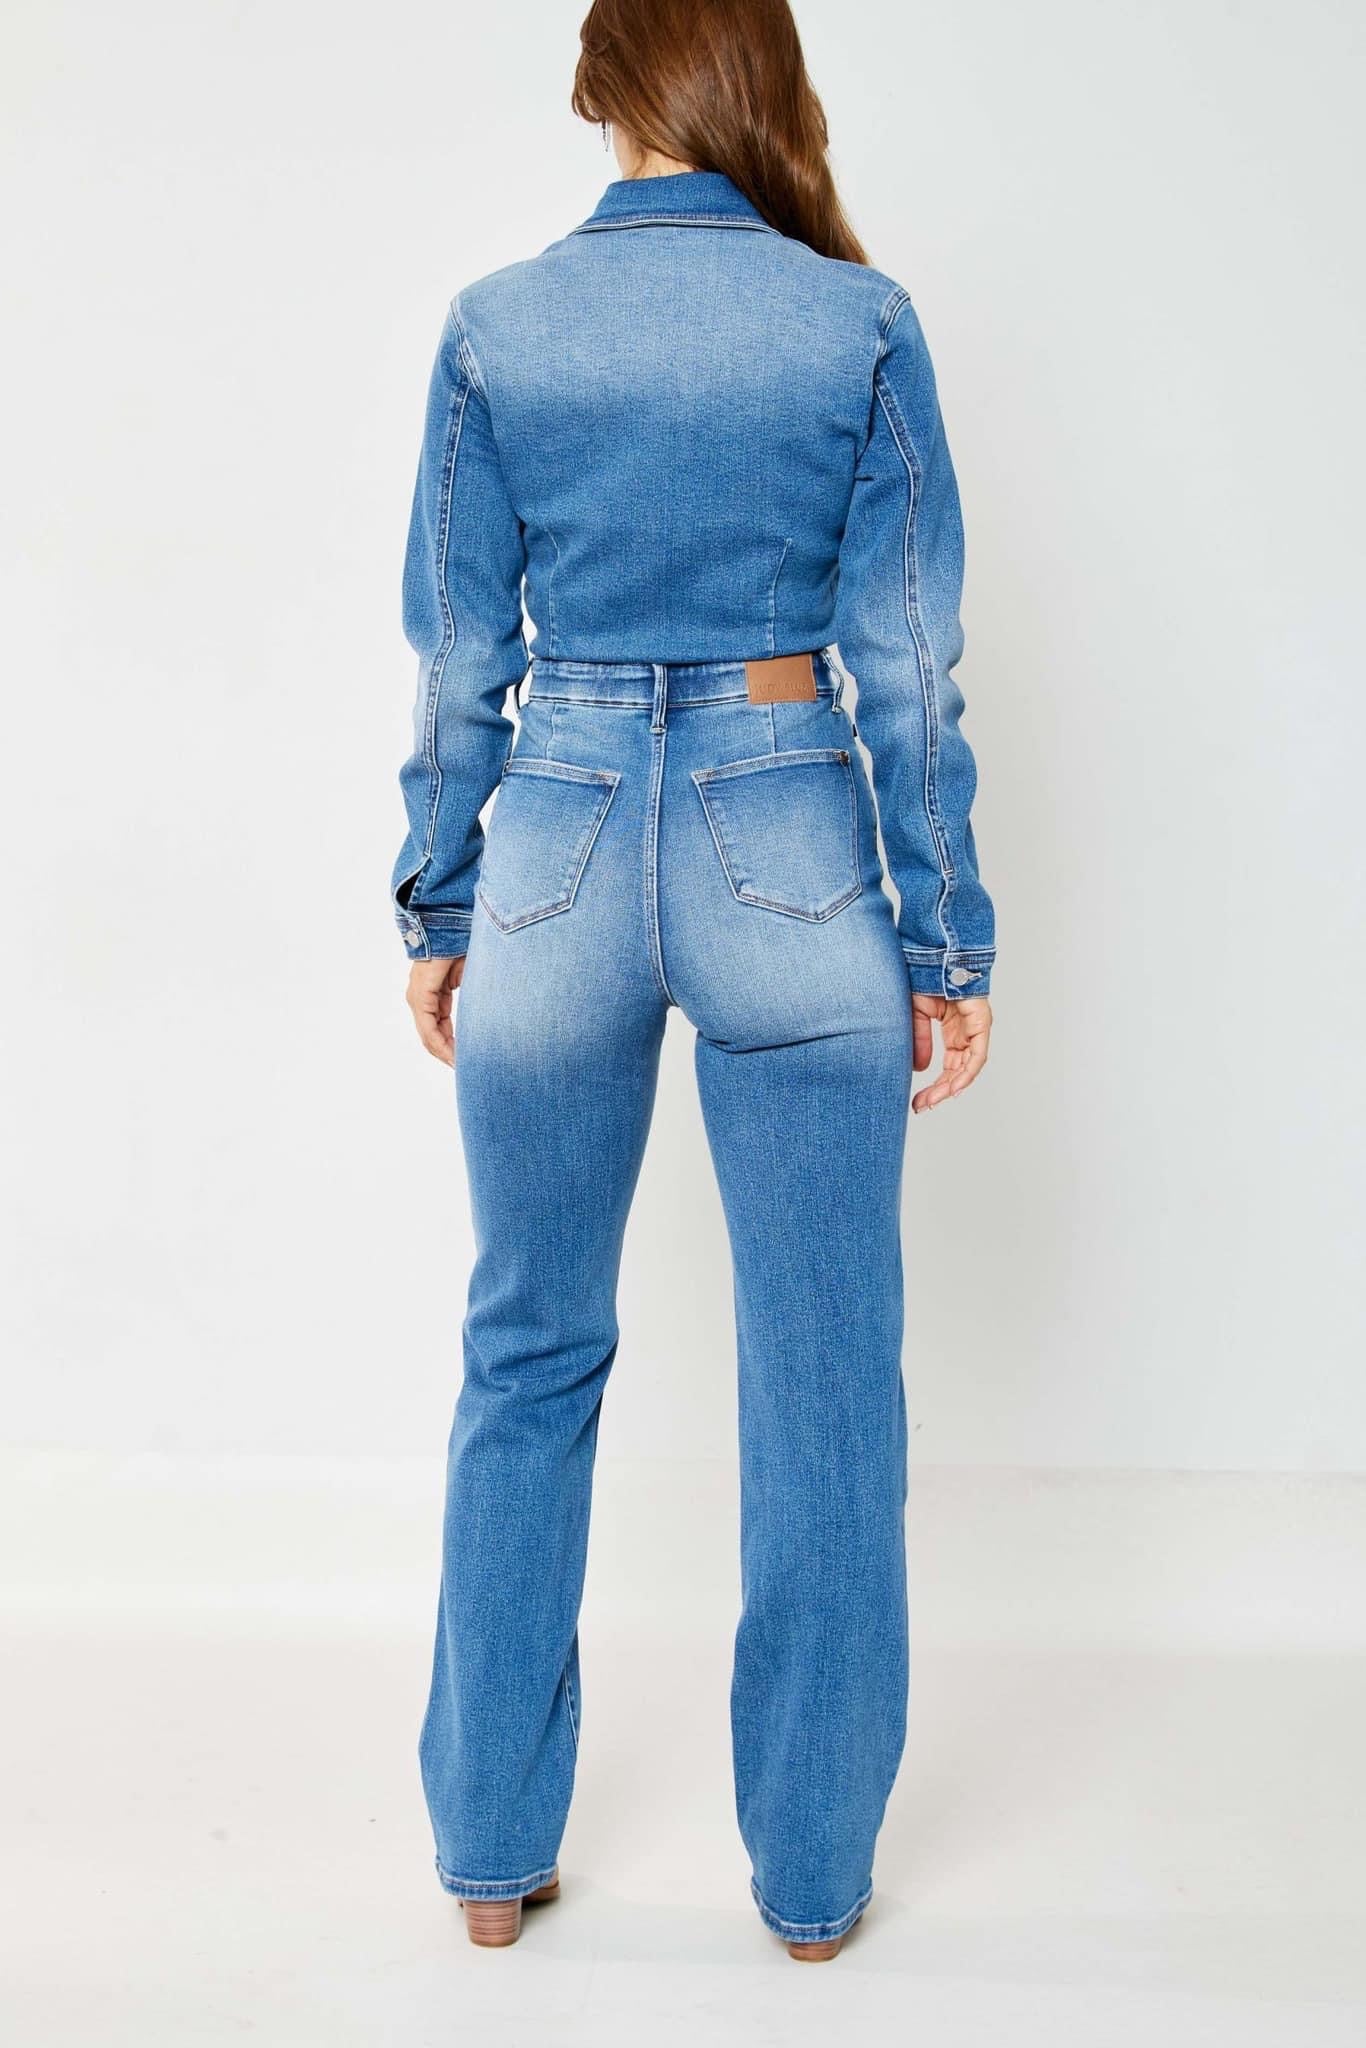 Stay Snatched Judy Blue Jumpsuit